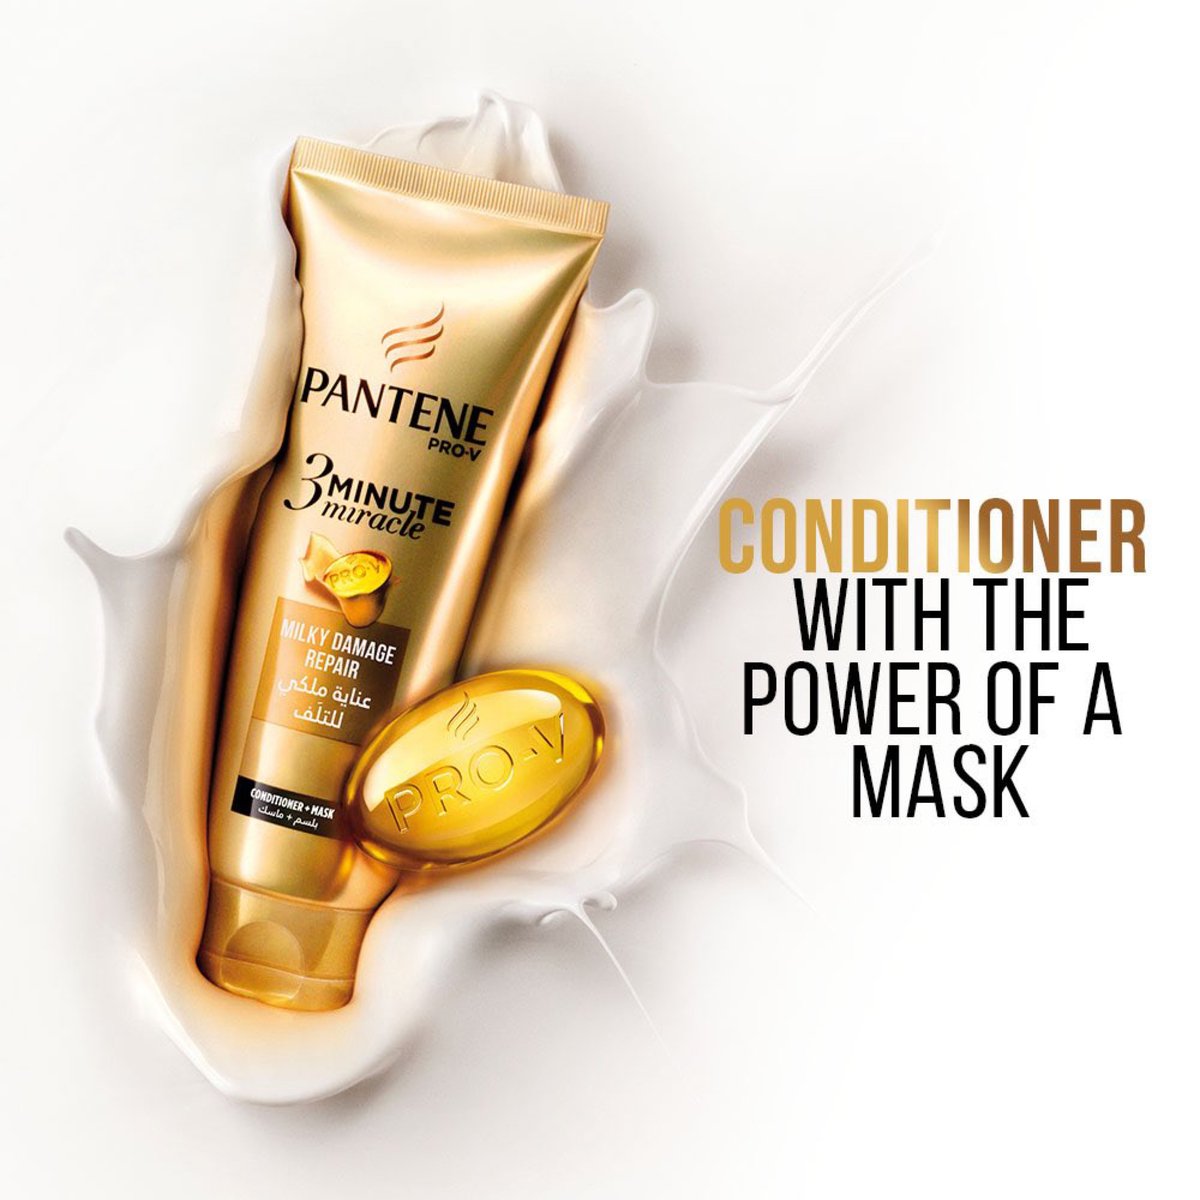 Pantene Pro-V 3 Minute Miracle Daily Care Conditioner + Mask 200ml & Pantene Pro-V Daily Care 2in1 Shampoo 400ml 